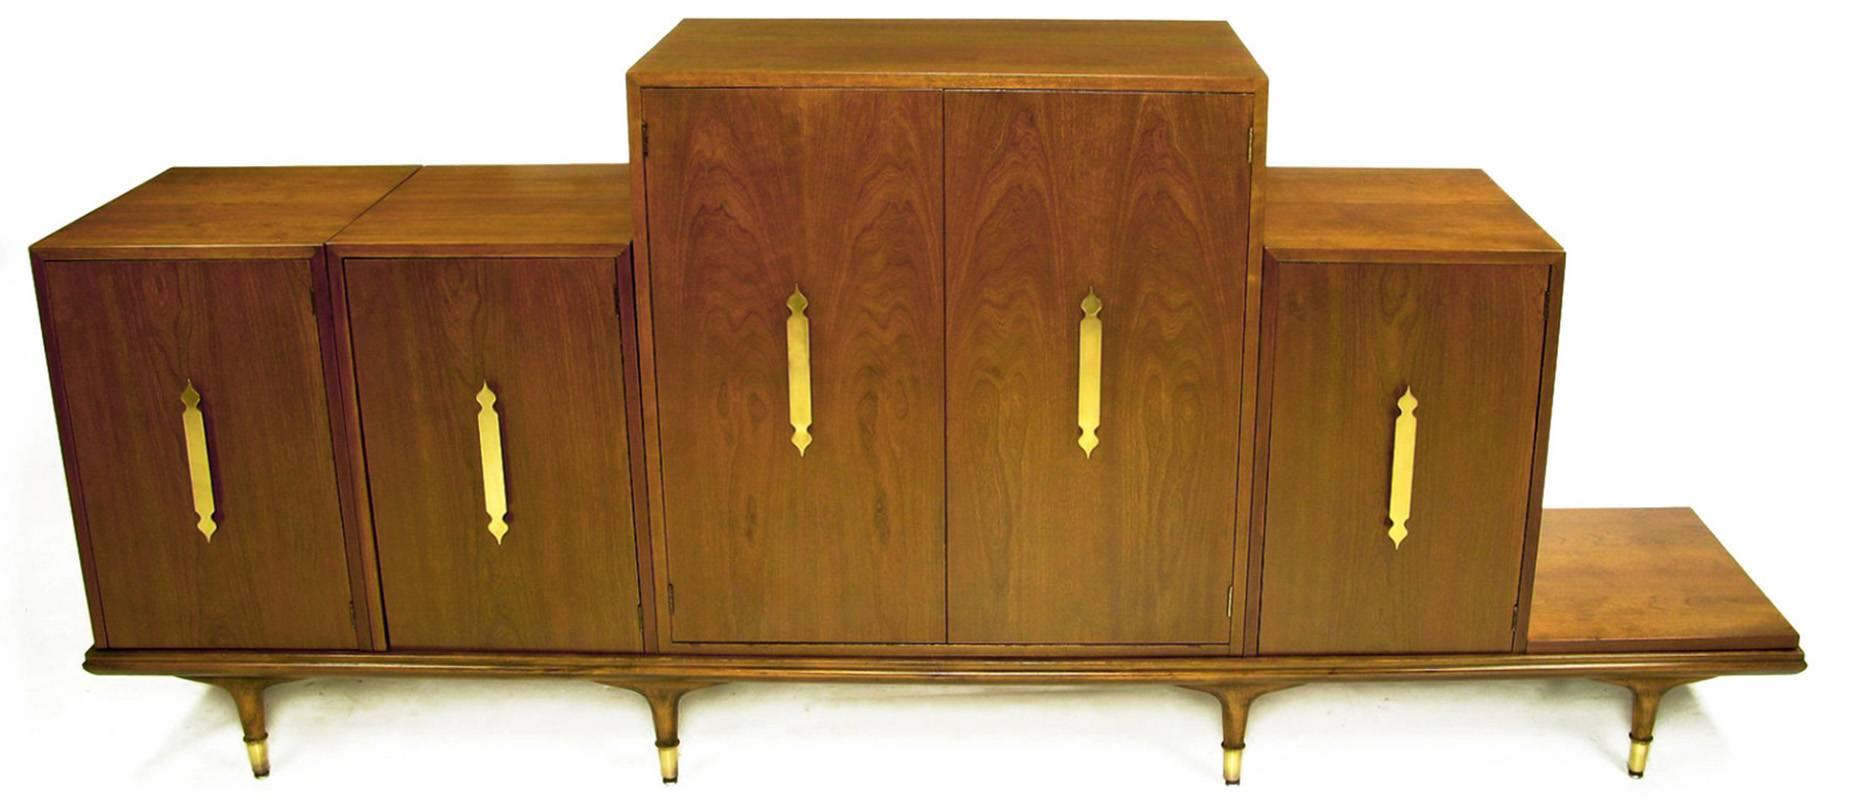 Very rare and unusual piece by Edward Wormley. This modular credenza in walnut can be put together in a host of different configurations. Detailed with large Moorish style solid brass pulls and brass sabots.